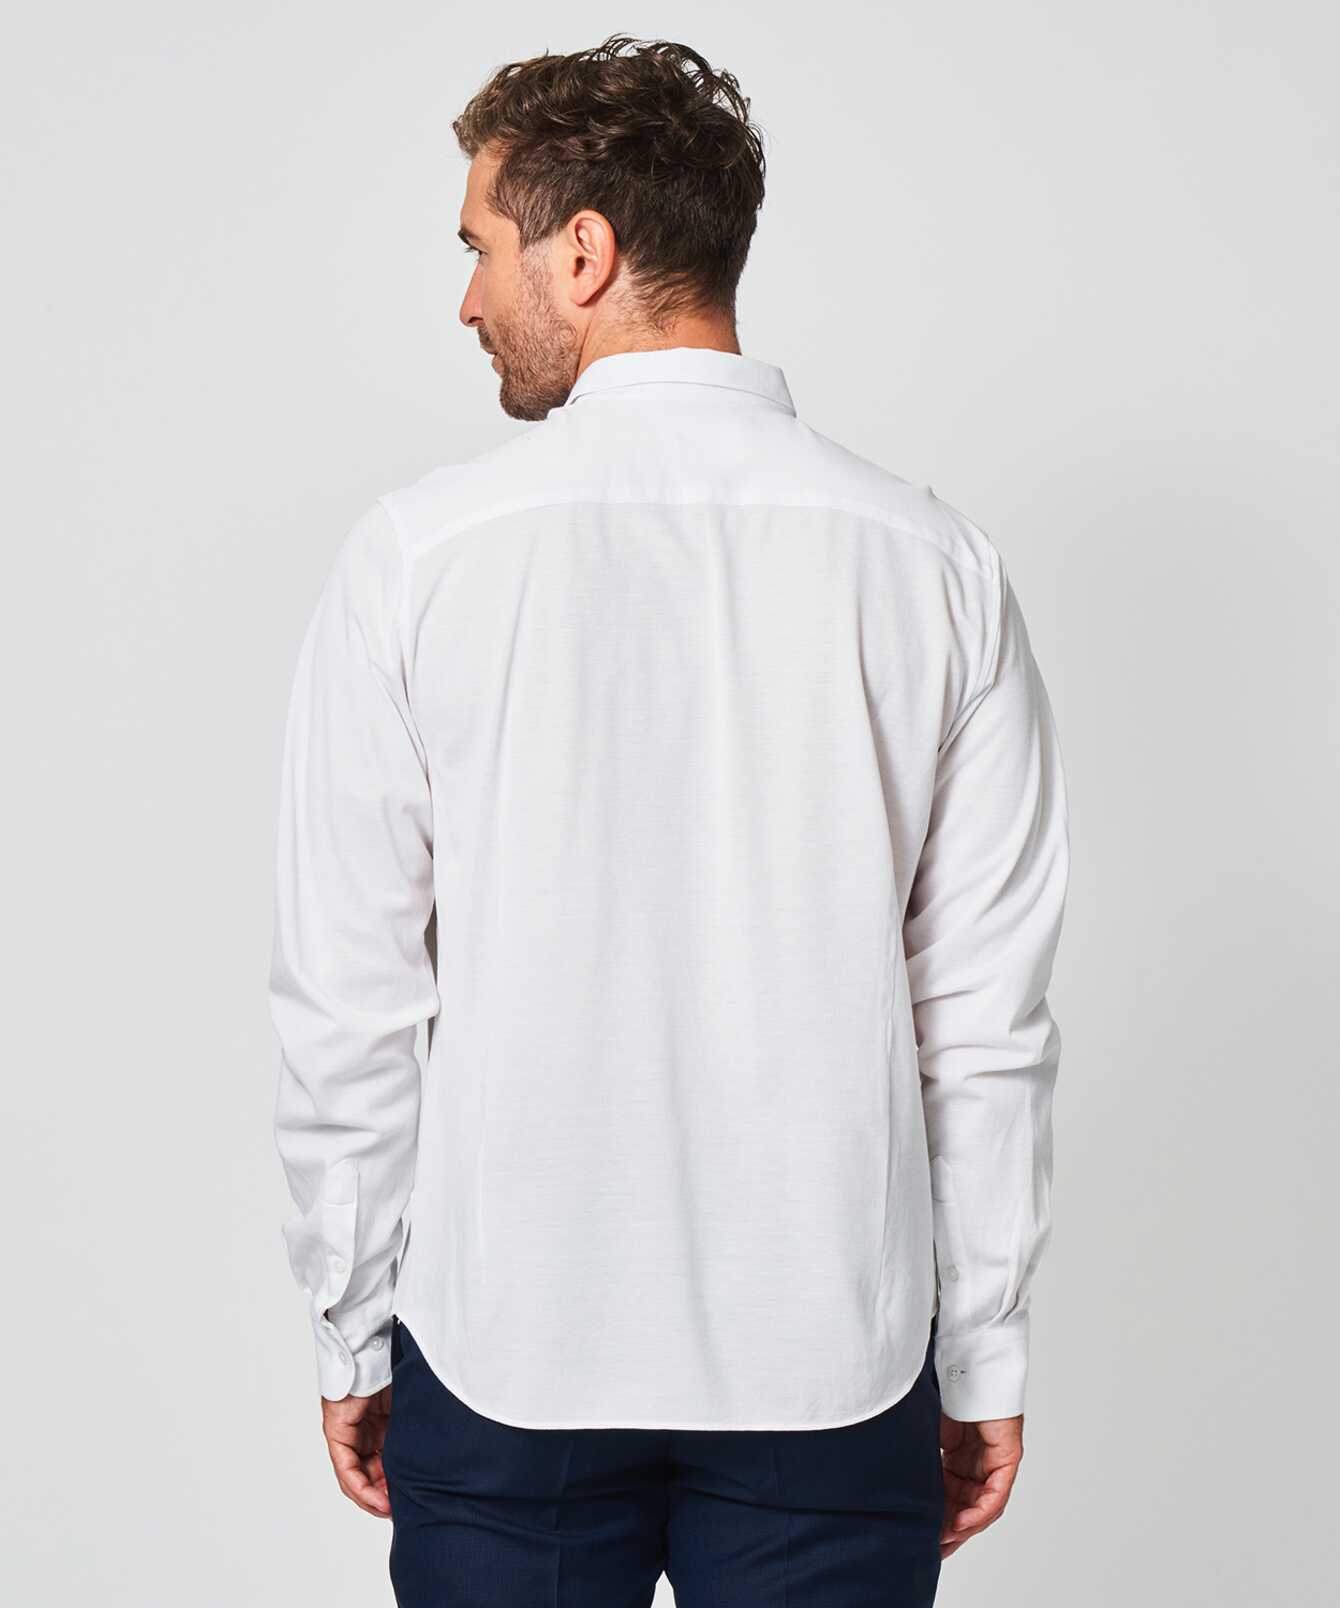 Shirt Royal Troon Pike White Pique Shirt in Mercerised cotton The Shirt Factory